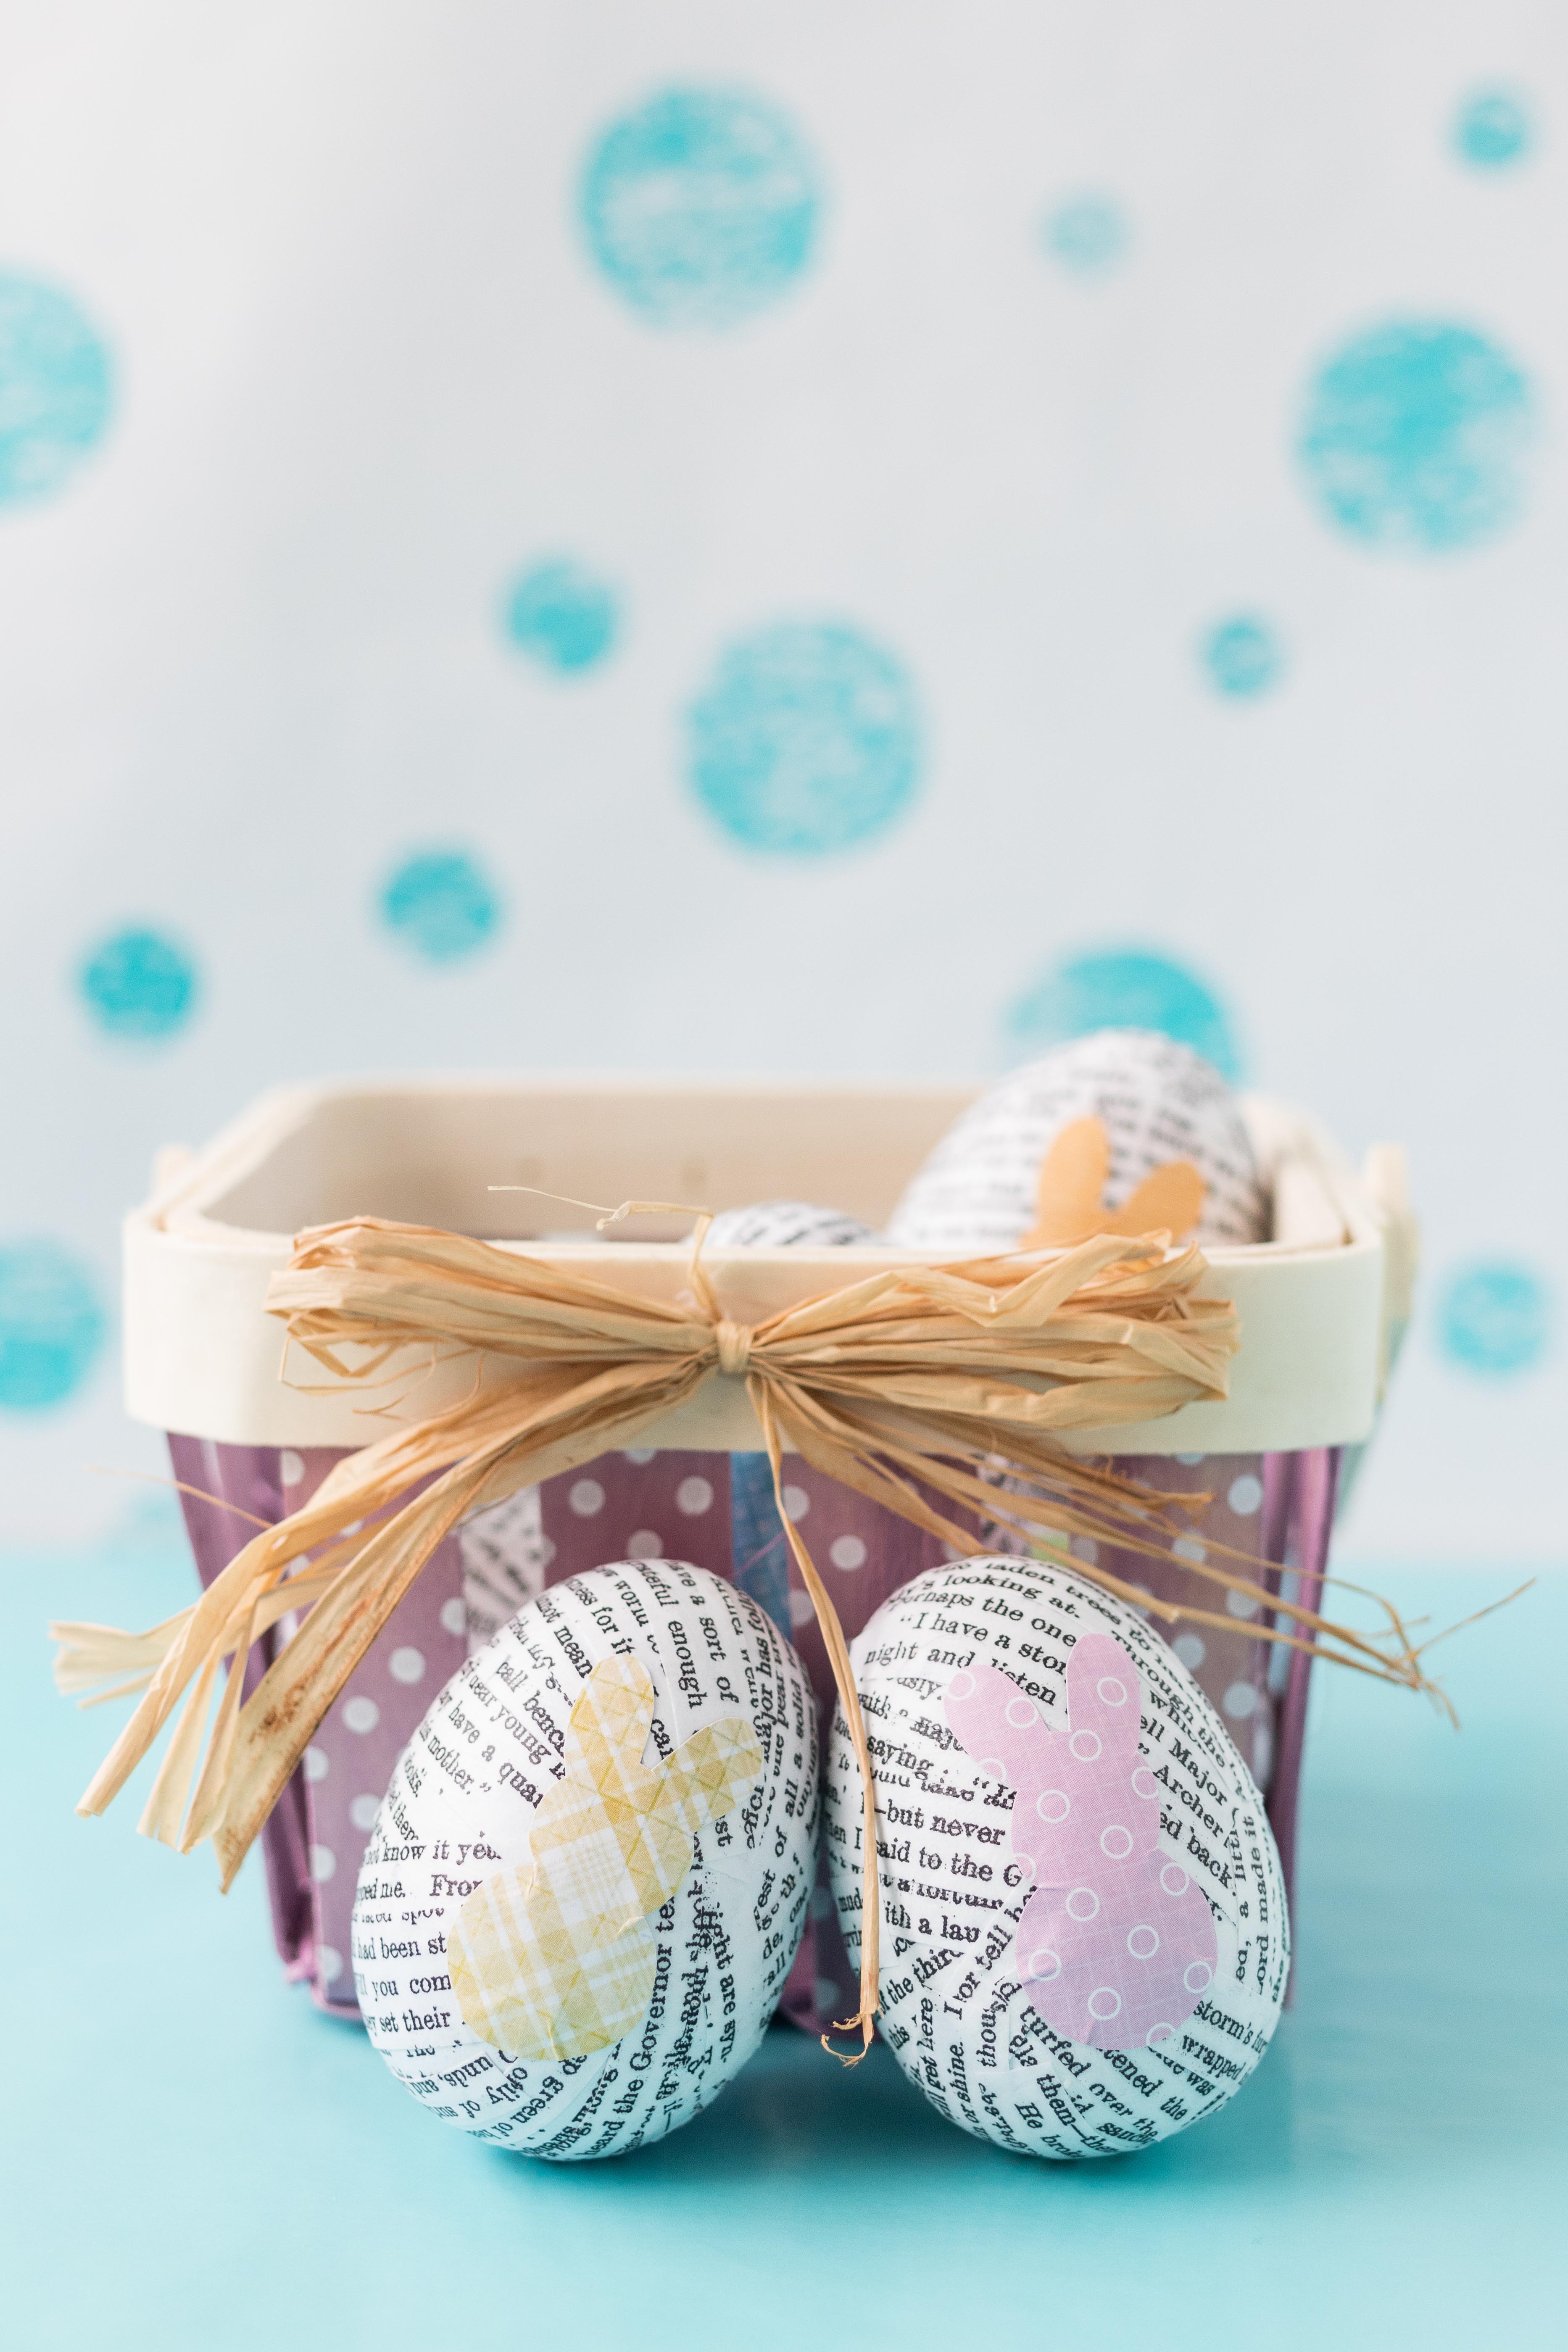 Learn how to make DIY book page plastic Easter eggs with upcycled book pages! A simple, easy, fun Easter decorating craft project. #Easter #upcycled #bookpages | https://www.roseclearfield.com